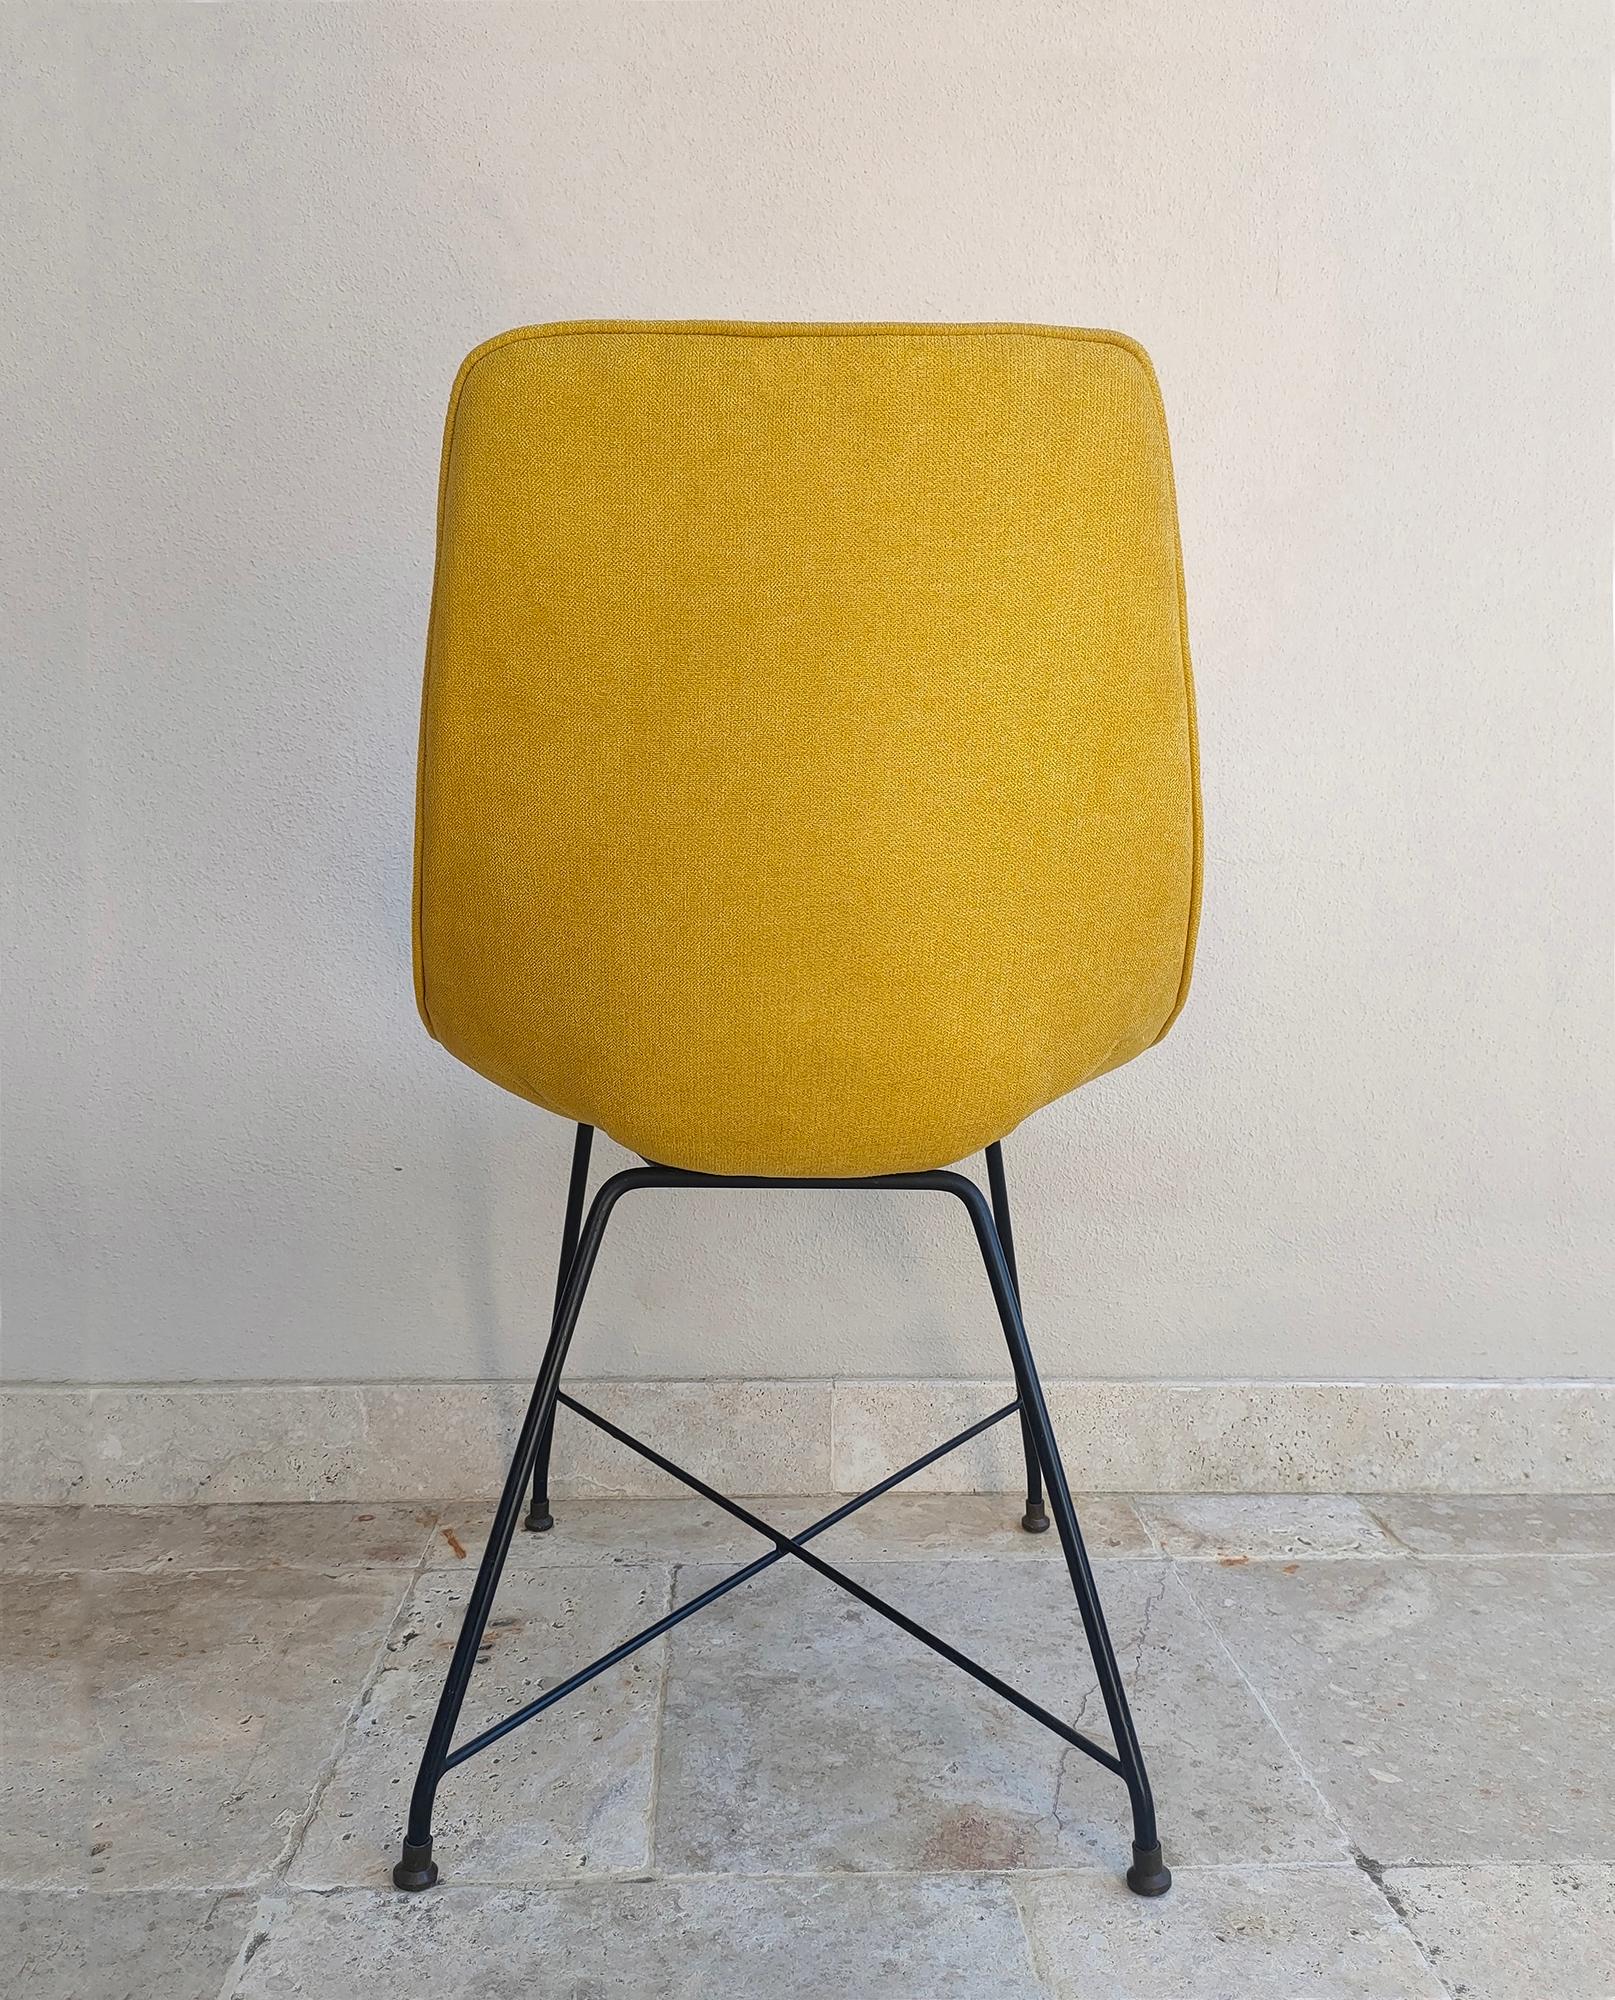 Mid-20th Century Augusto Bozzi Set of Two Aster Chairs by Saporiti 1950s For Sale